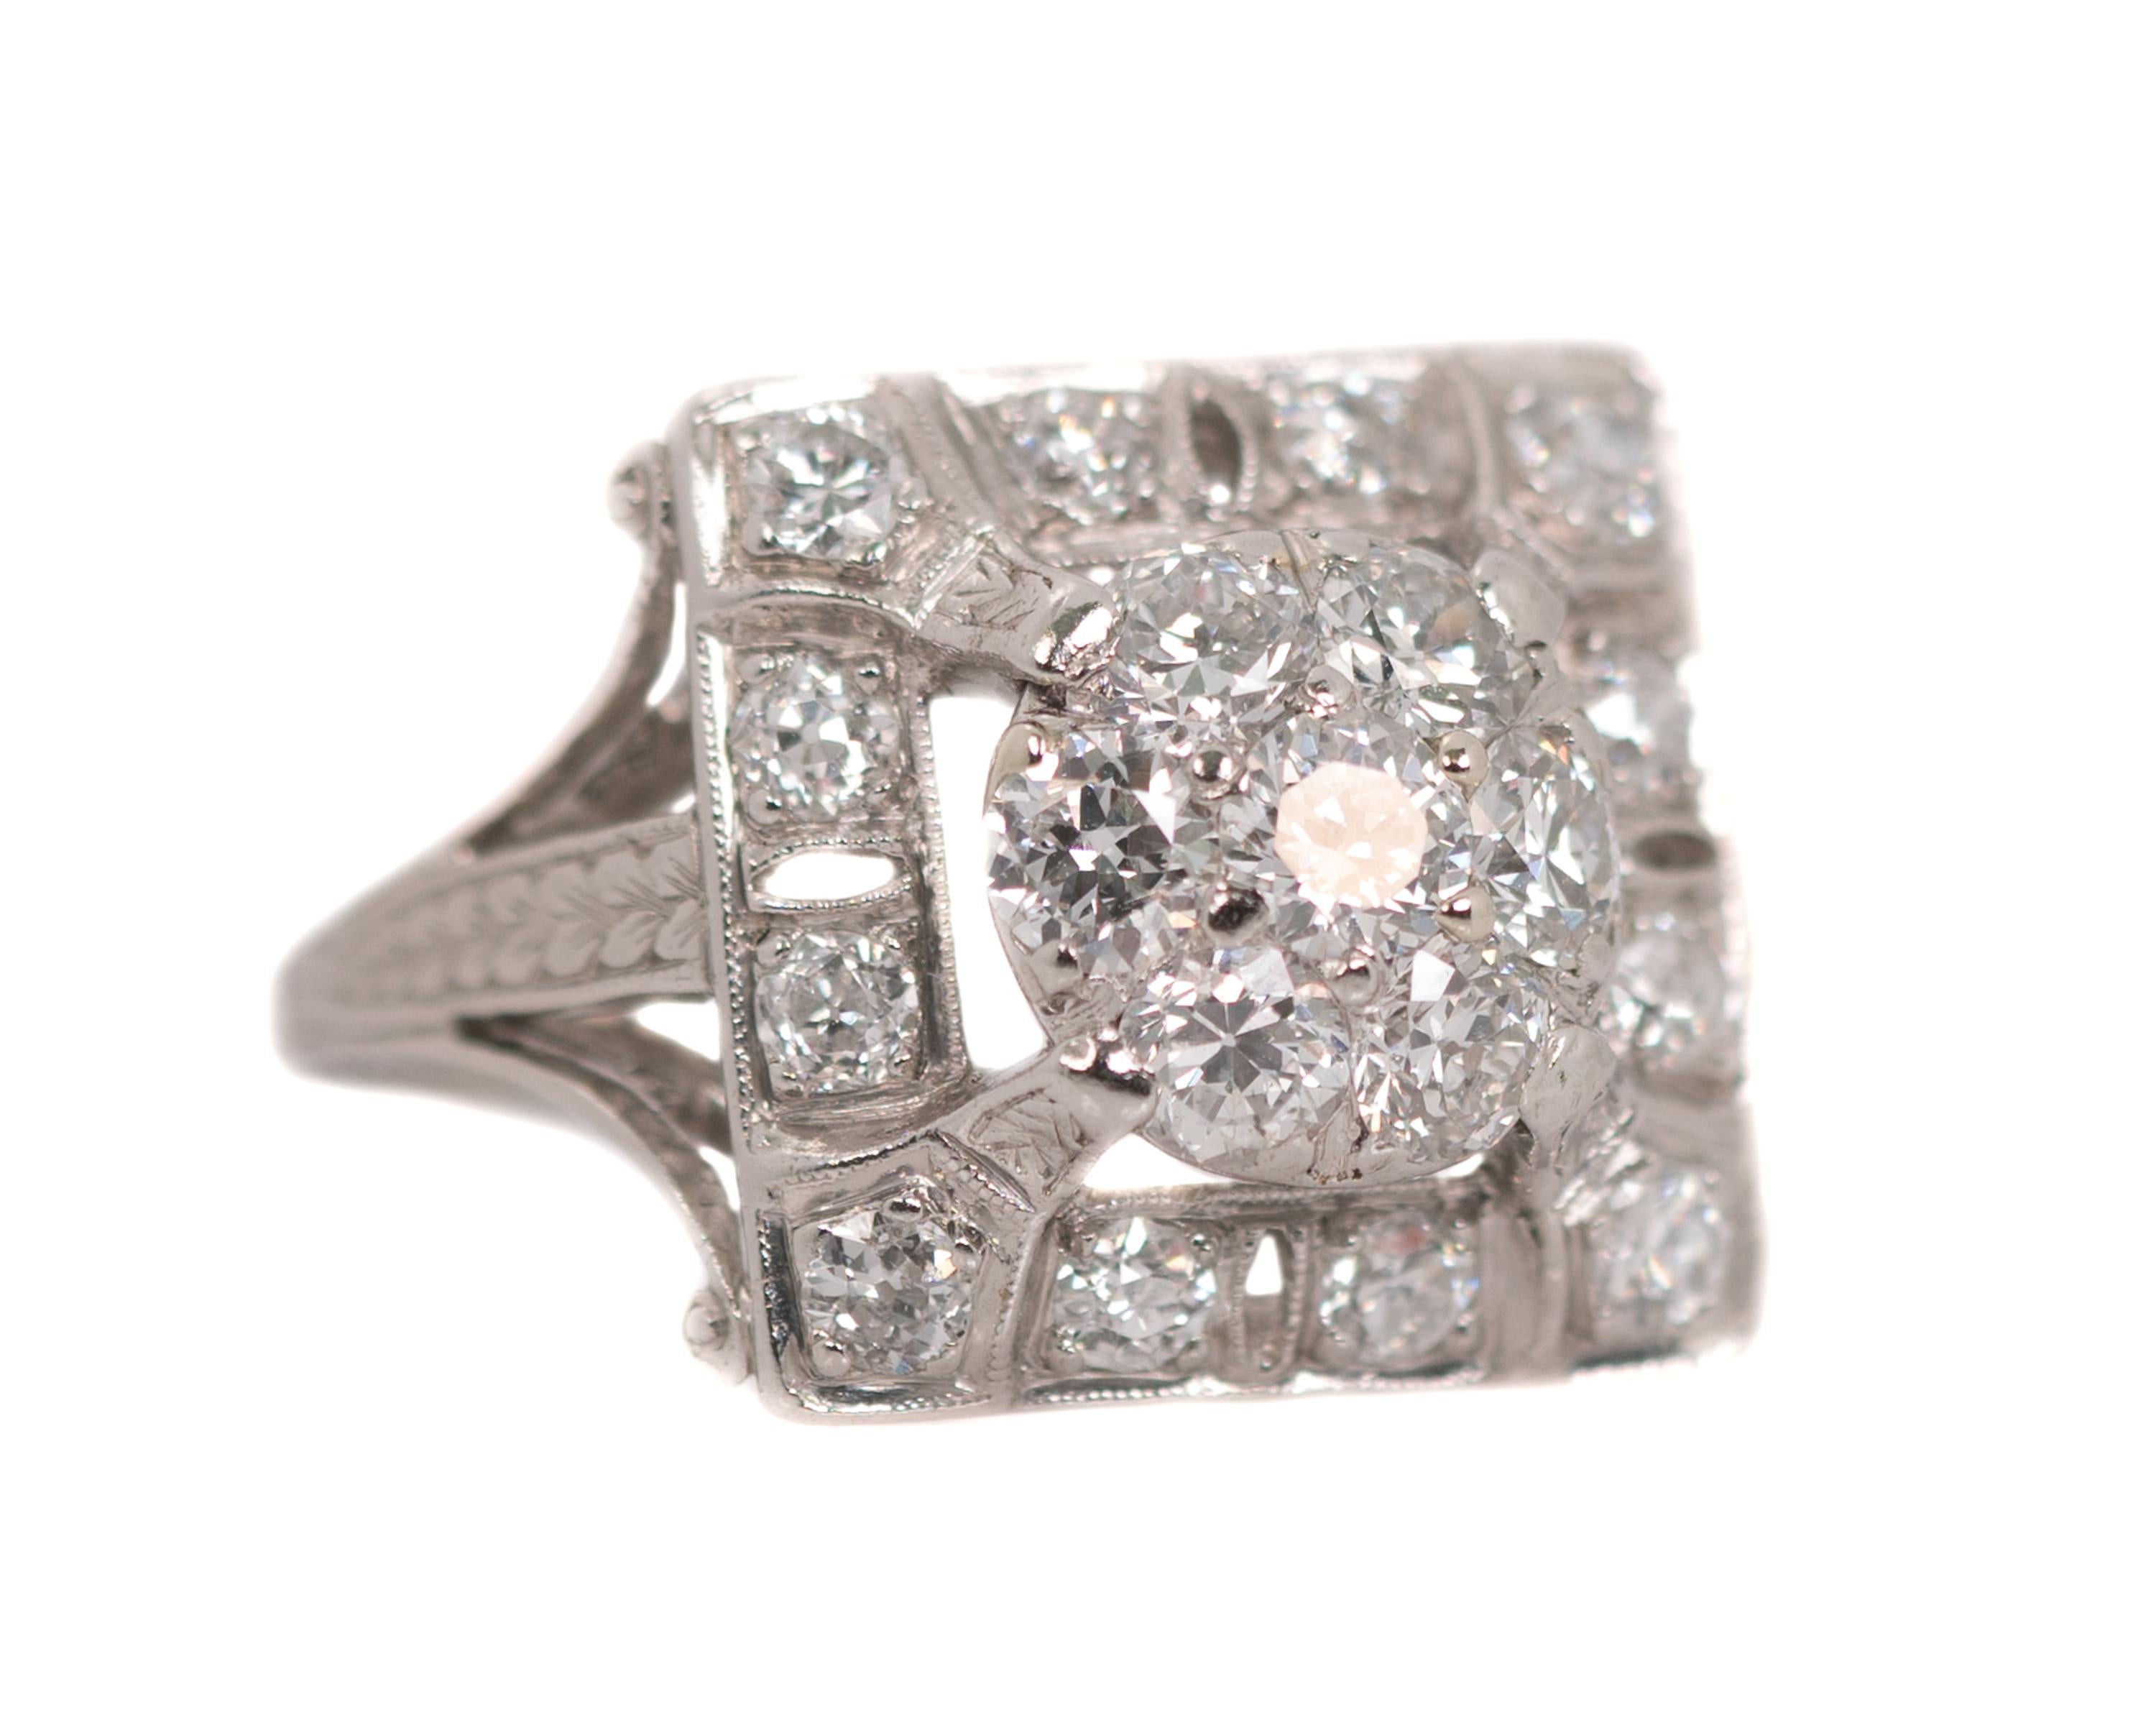 1930s Art Deco TK Co Square Diamond Cluster Ring - Platinum, Diamonds

Features:
2.5 carat total weight Old Miner and Old European Diamonds (19 Diamonds)
Square Frame
Round Center
Split Shank 
Ornate Open Shoulders and Gallery
Ribbon Scroll Upper